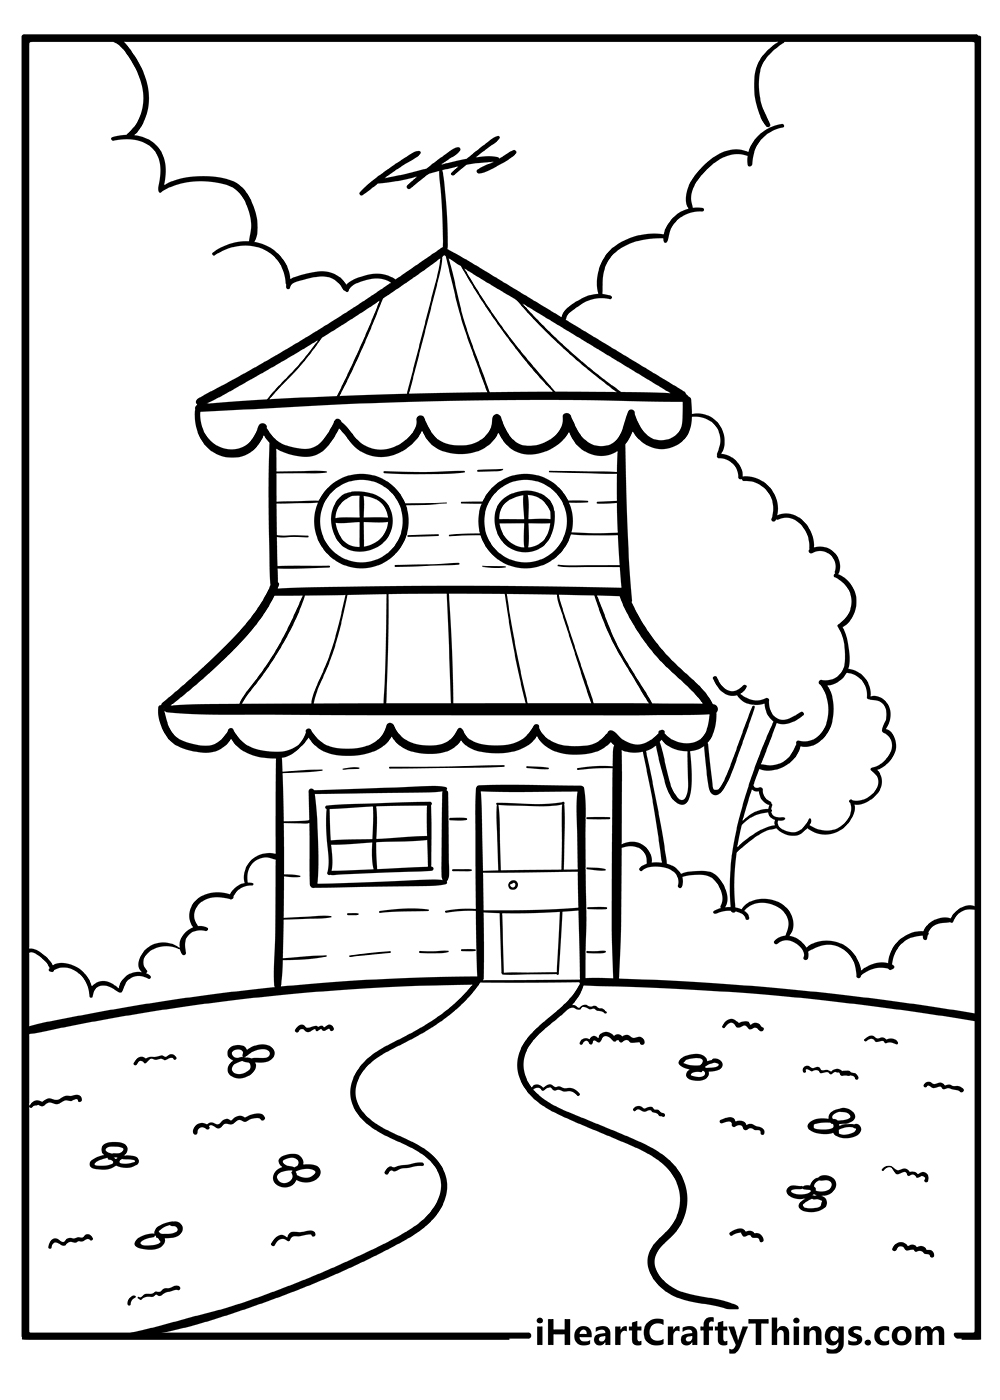 House Coloring Pages for preschoolers free printable